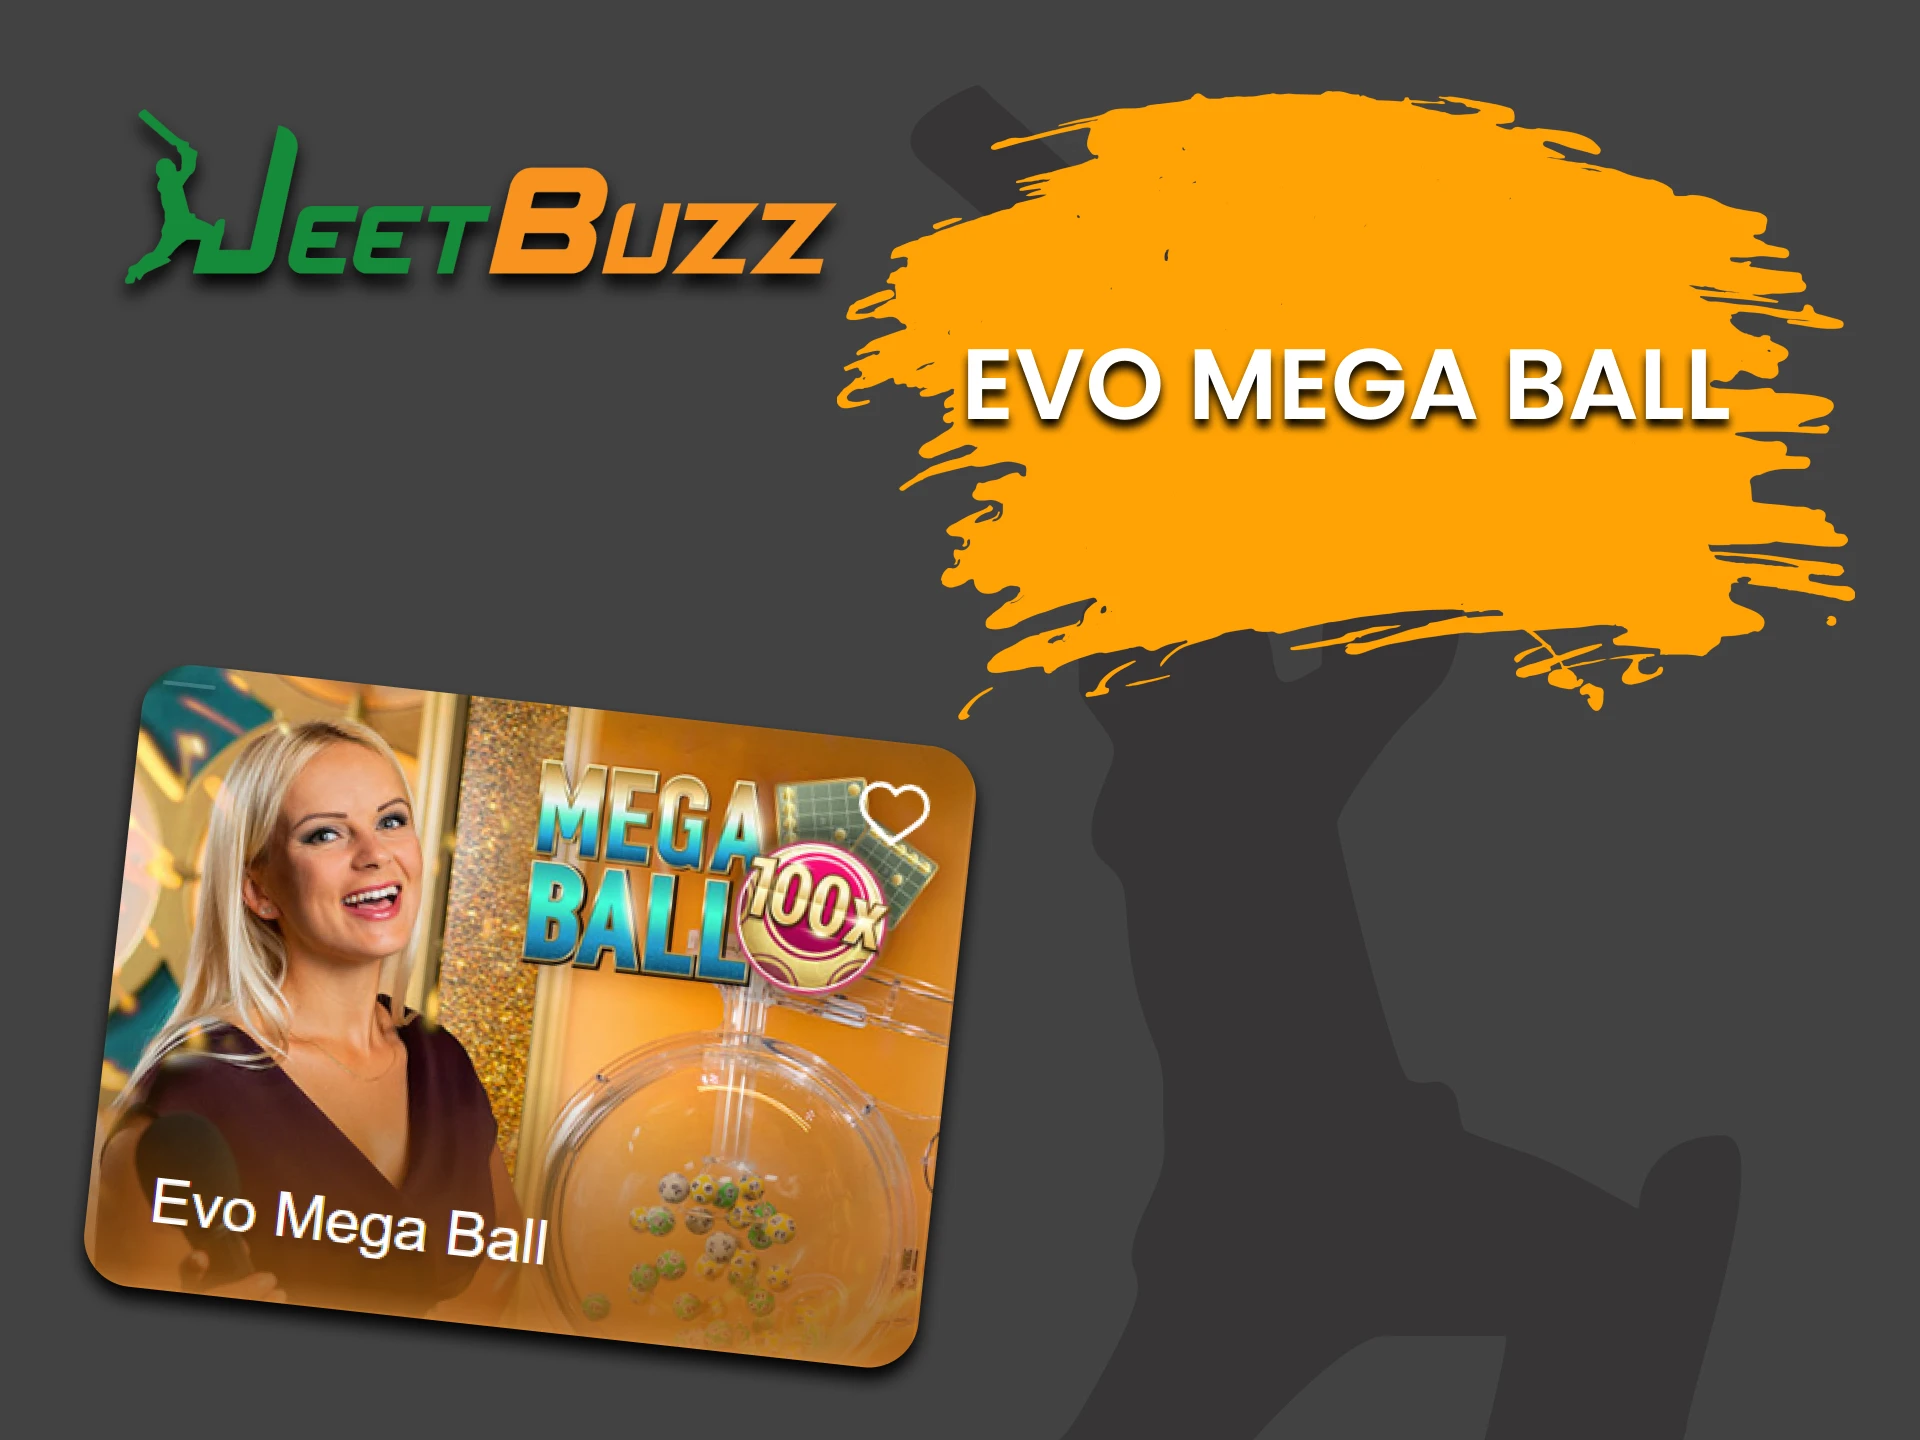 To play Jeetbuzz's Game Show, select "Evo Mega Ball".